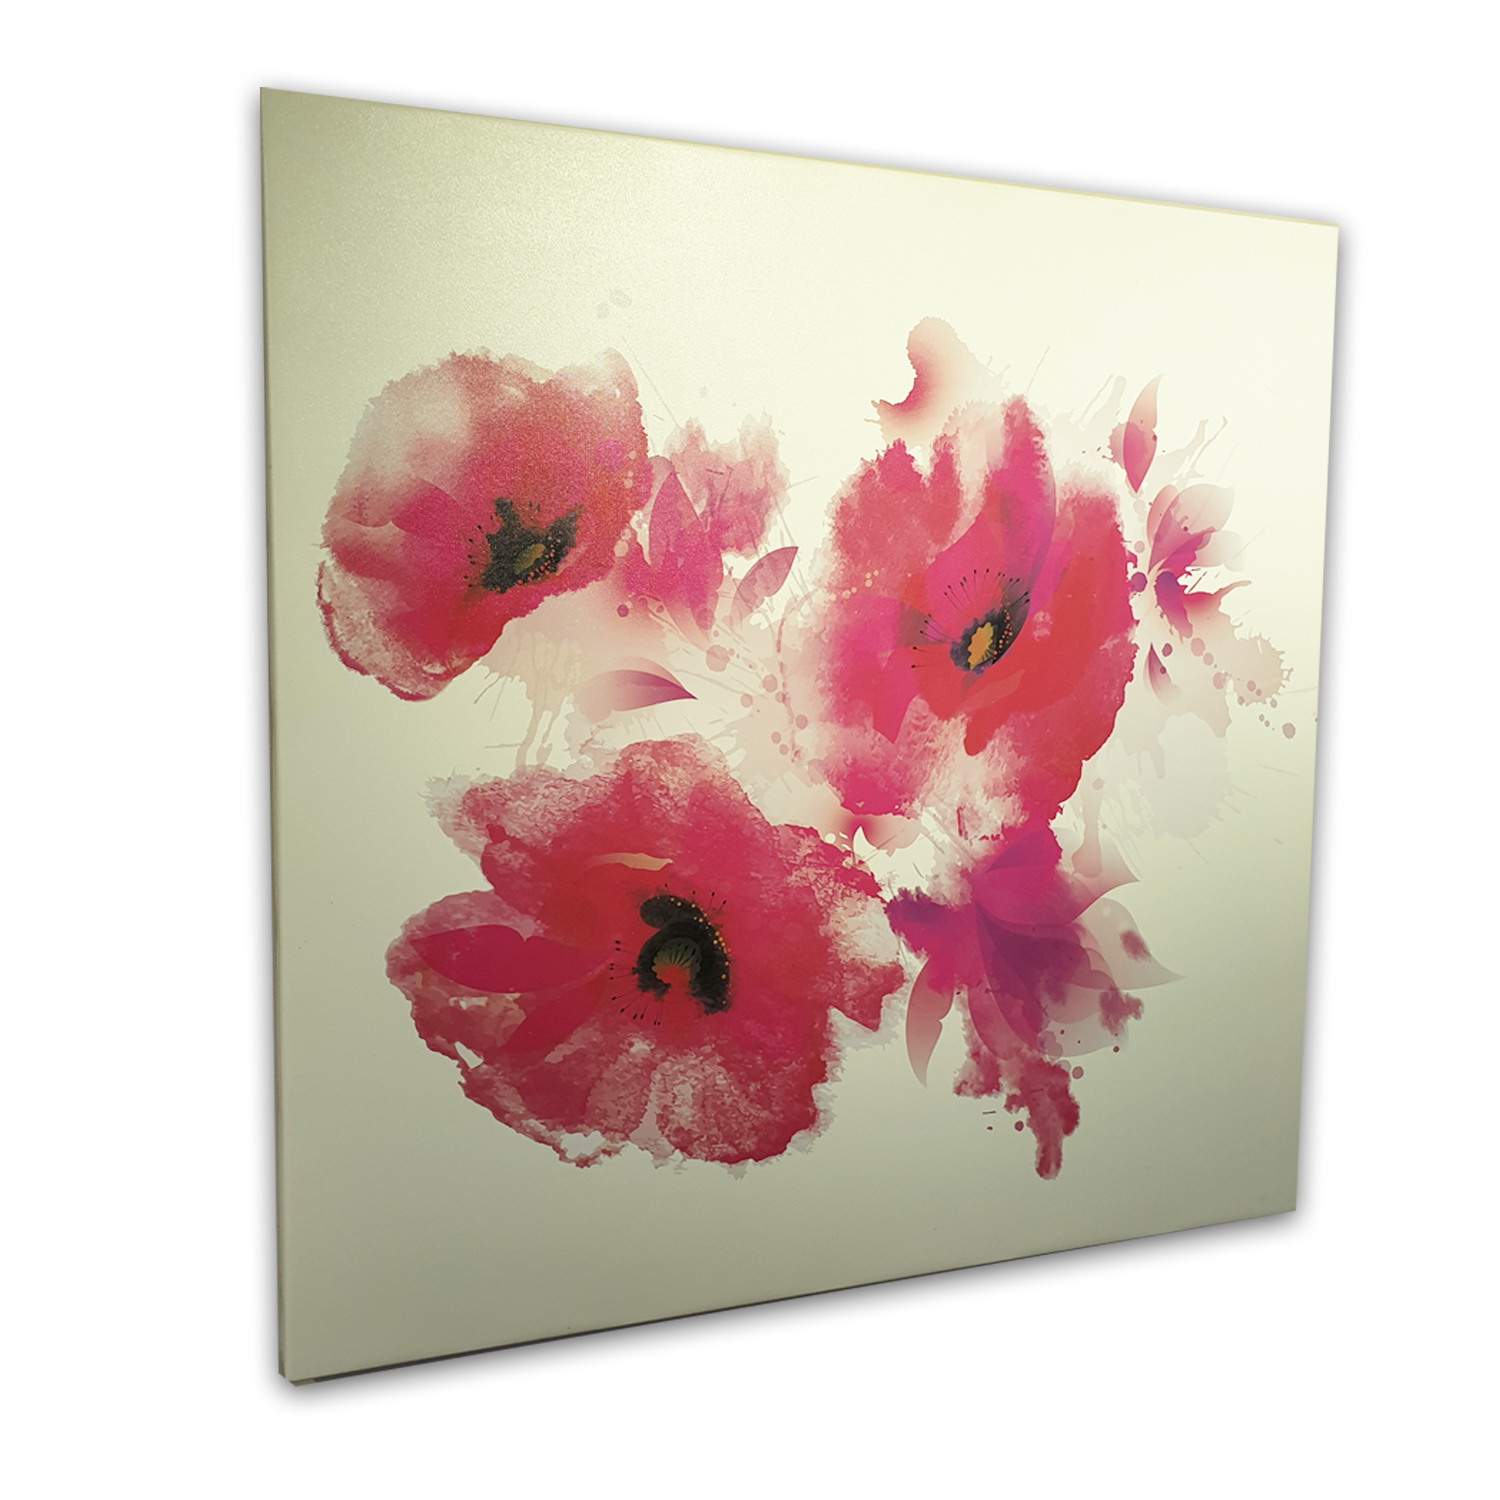 Flower Canvas Print 30×30 inches - To Do Designs